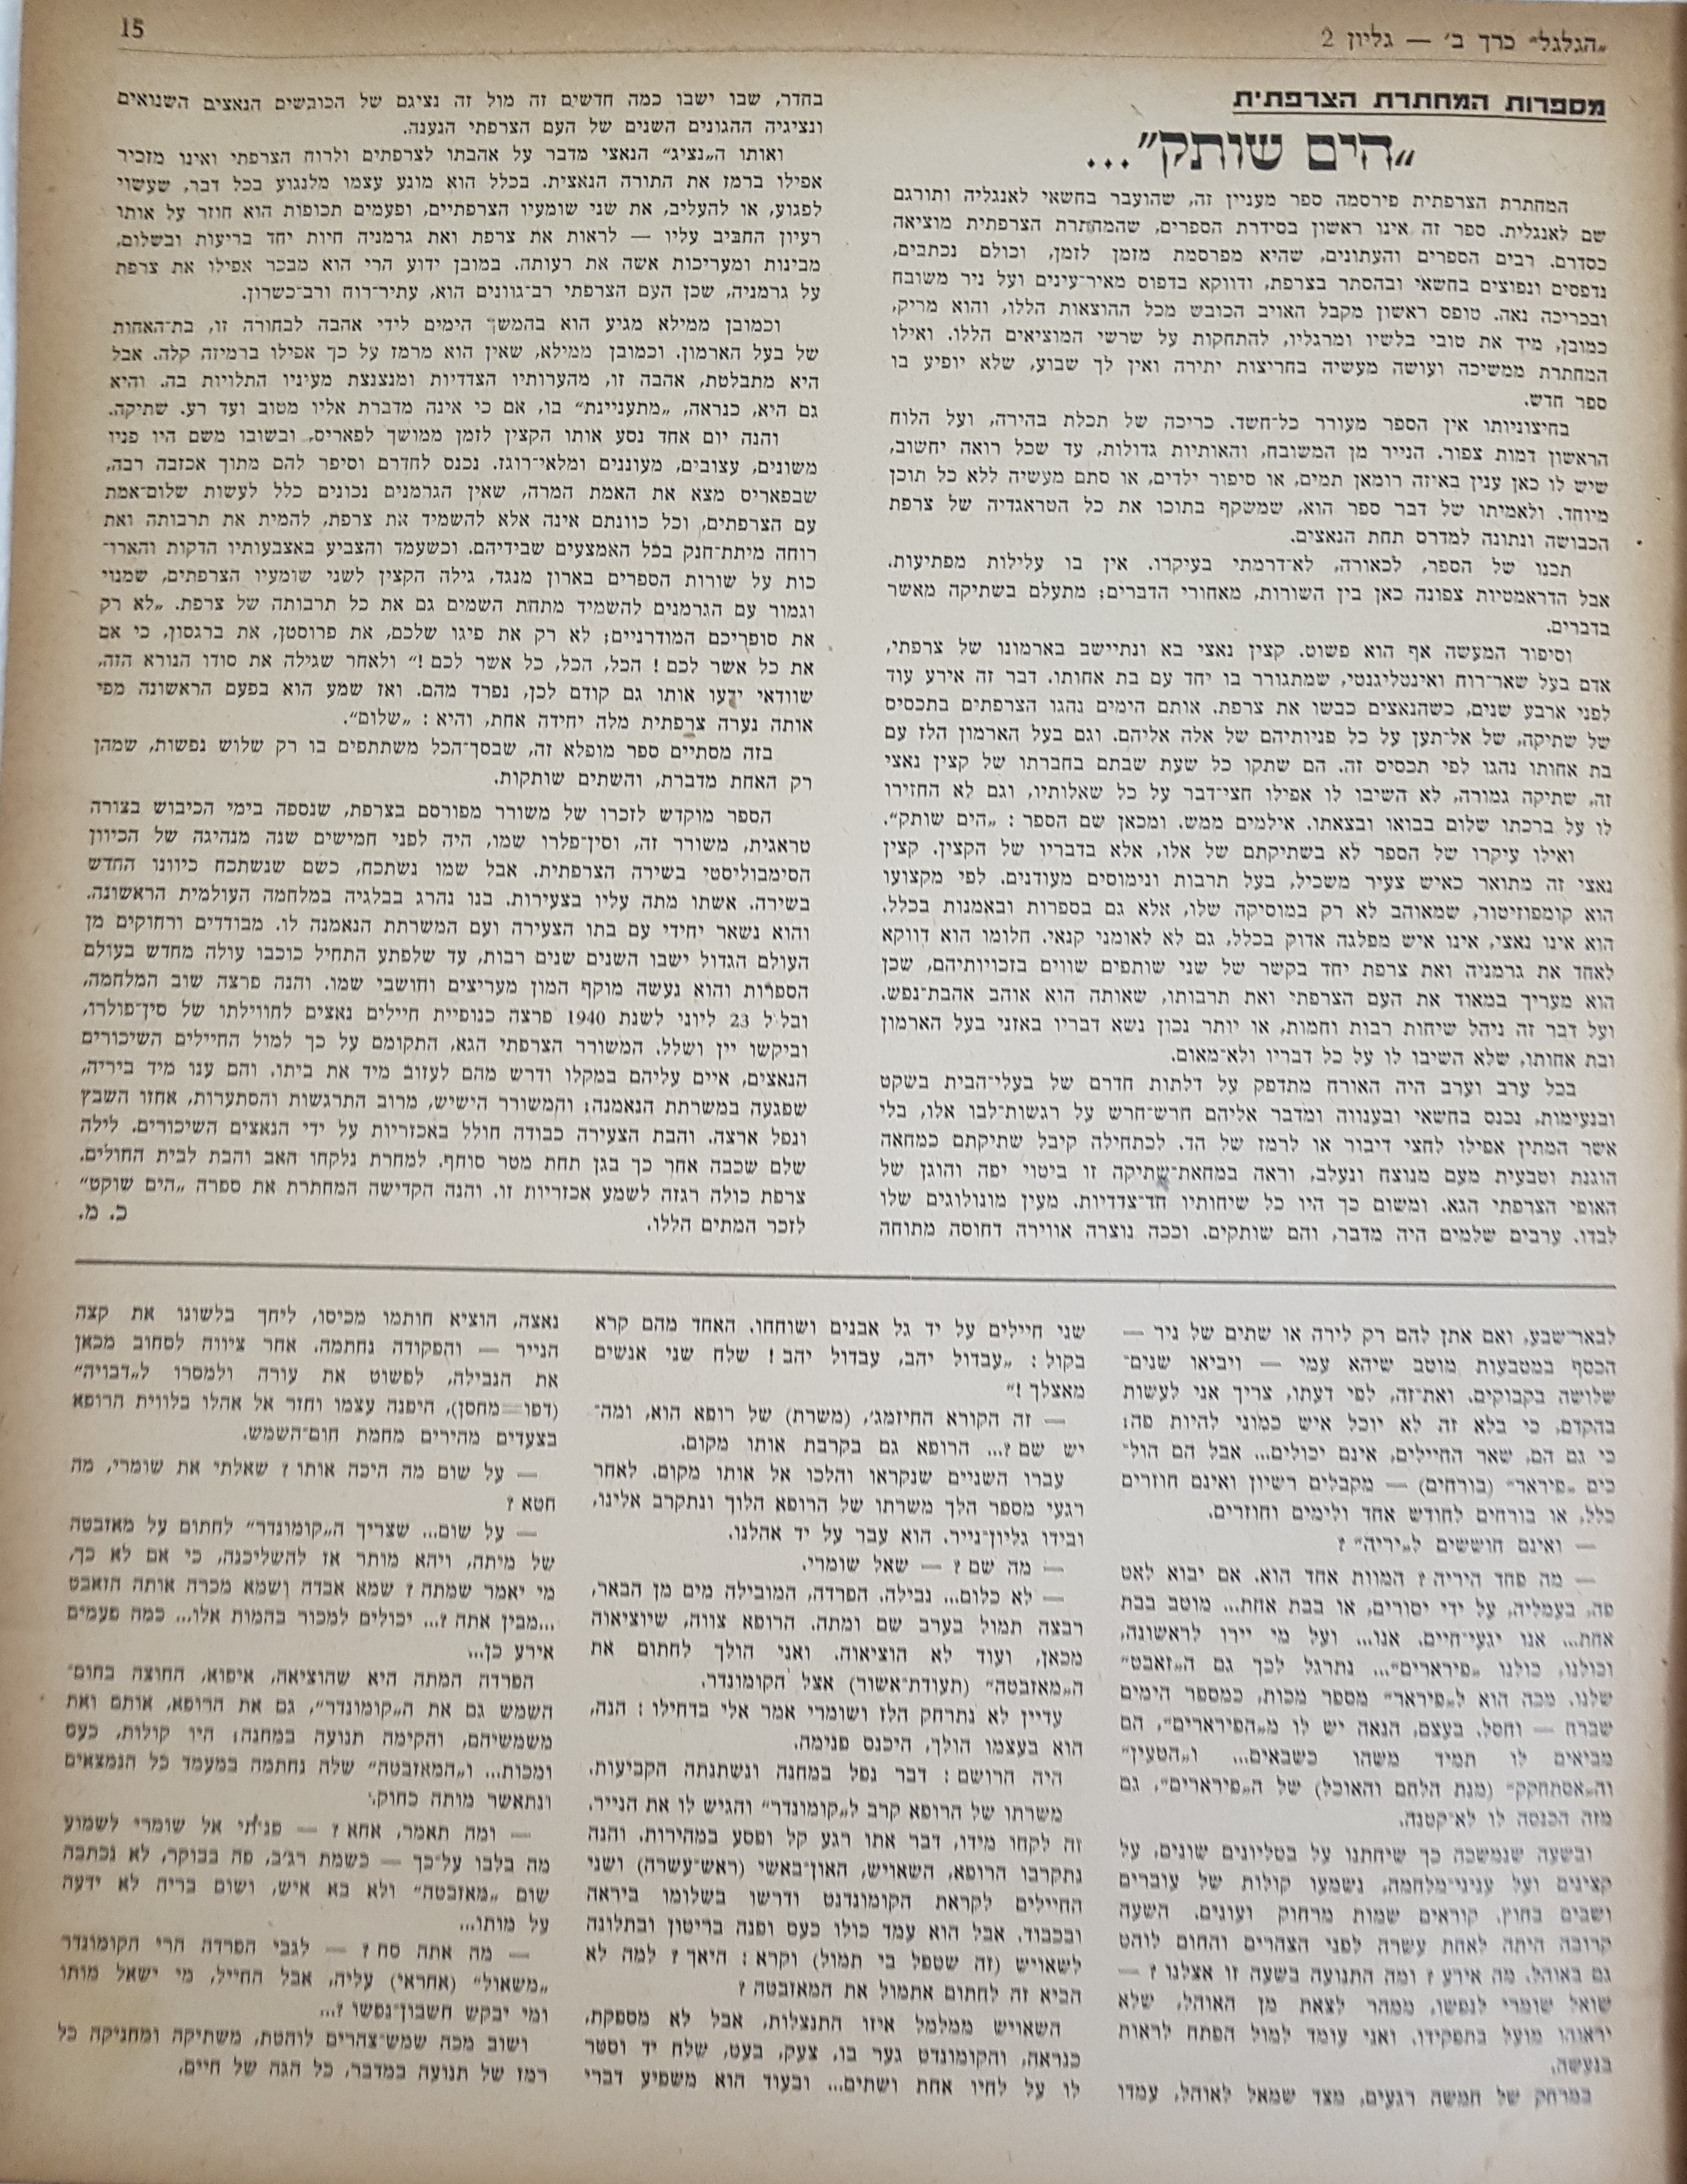   Photo: page 15